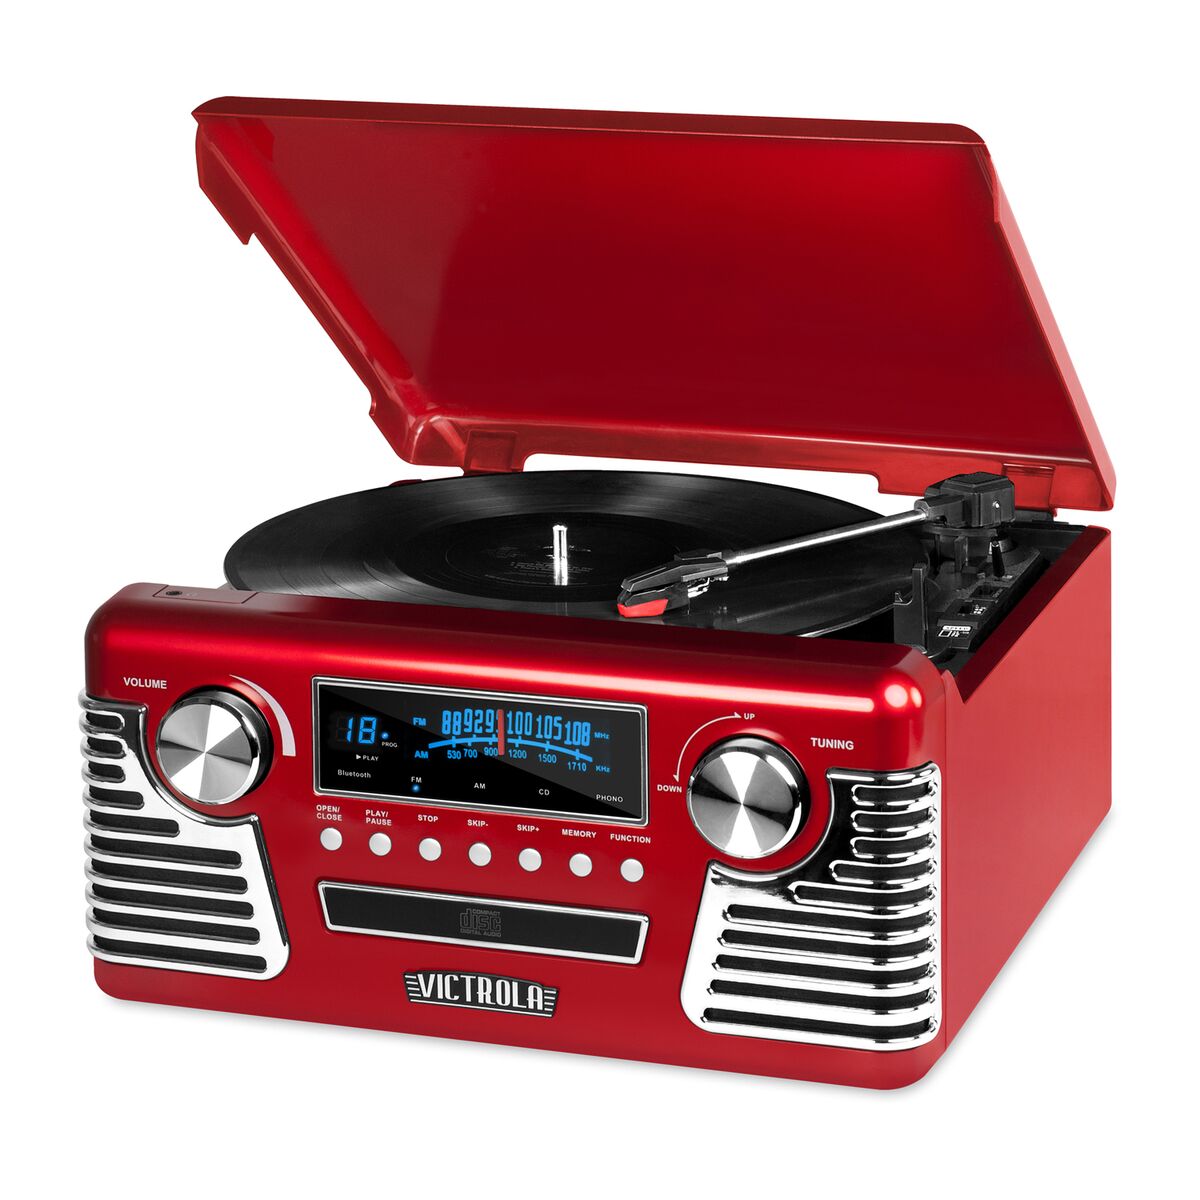 The Haley Retro Record Player with CD Player with Bluetooth – Victrola